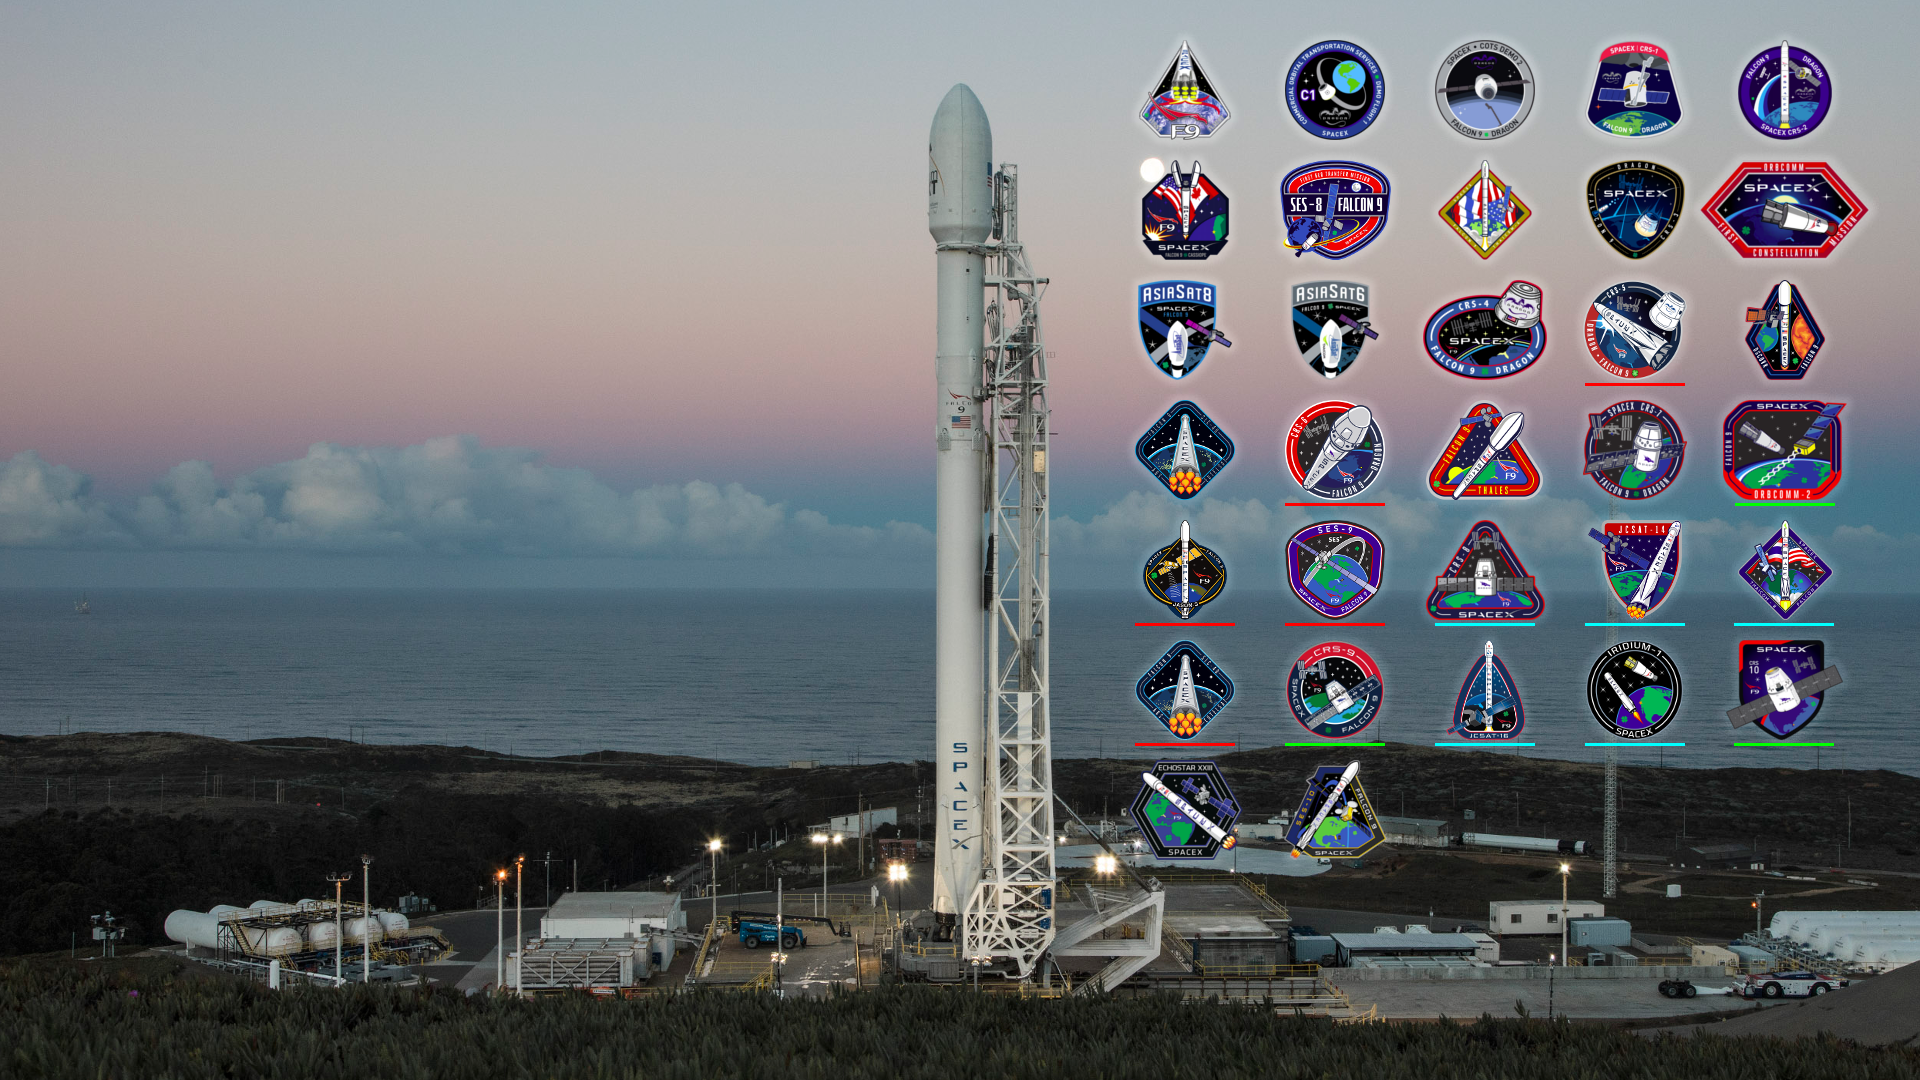 Spacex Background Spacexlounge